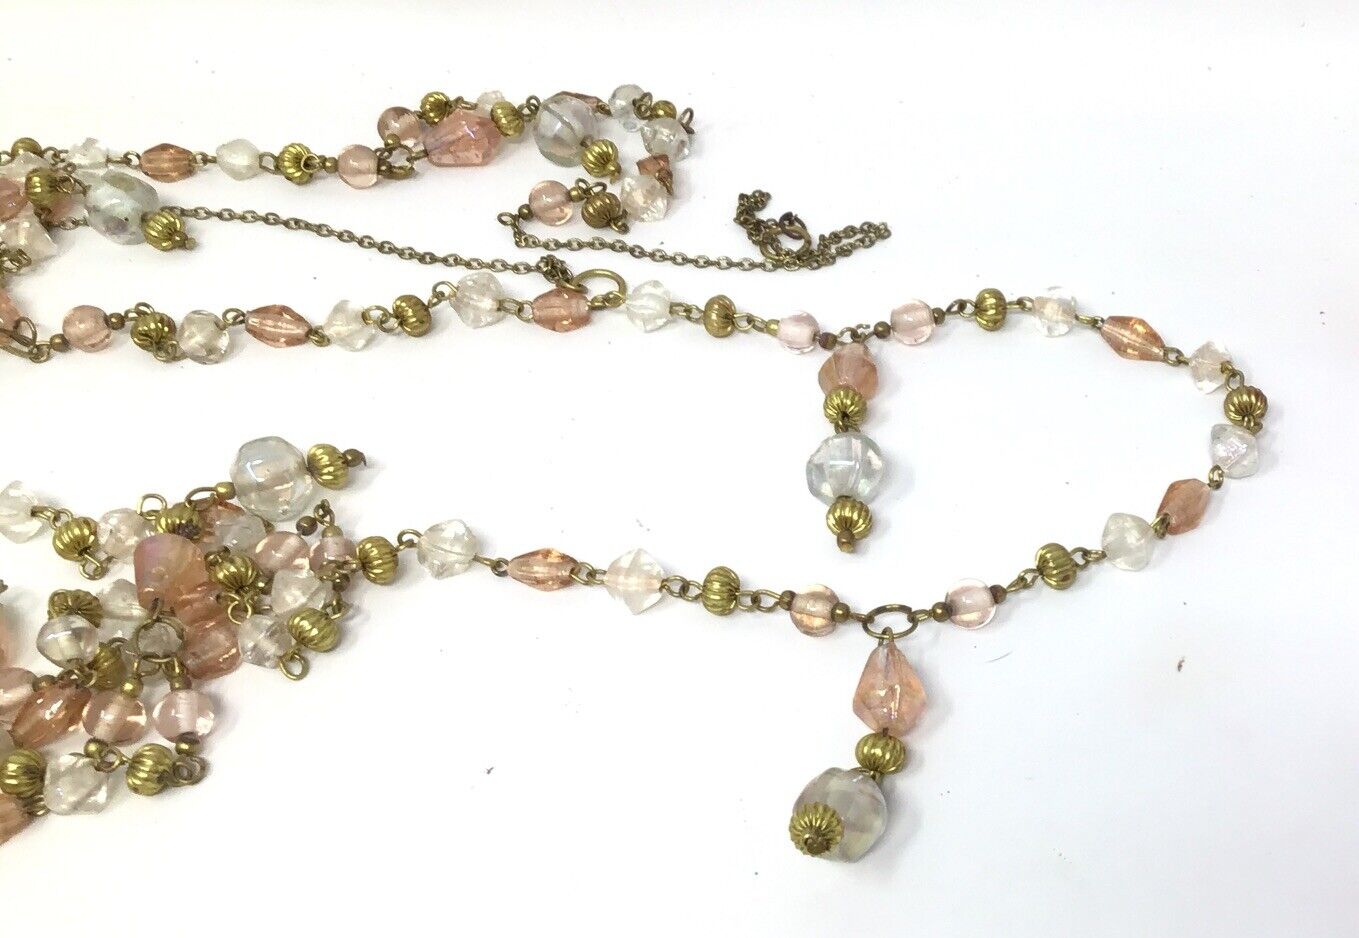 Antique Chain Bead Garland with Glass Beads Rare 9’ Long Iridescent Clear Pink